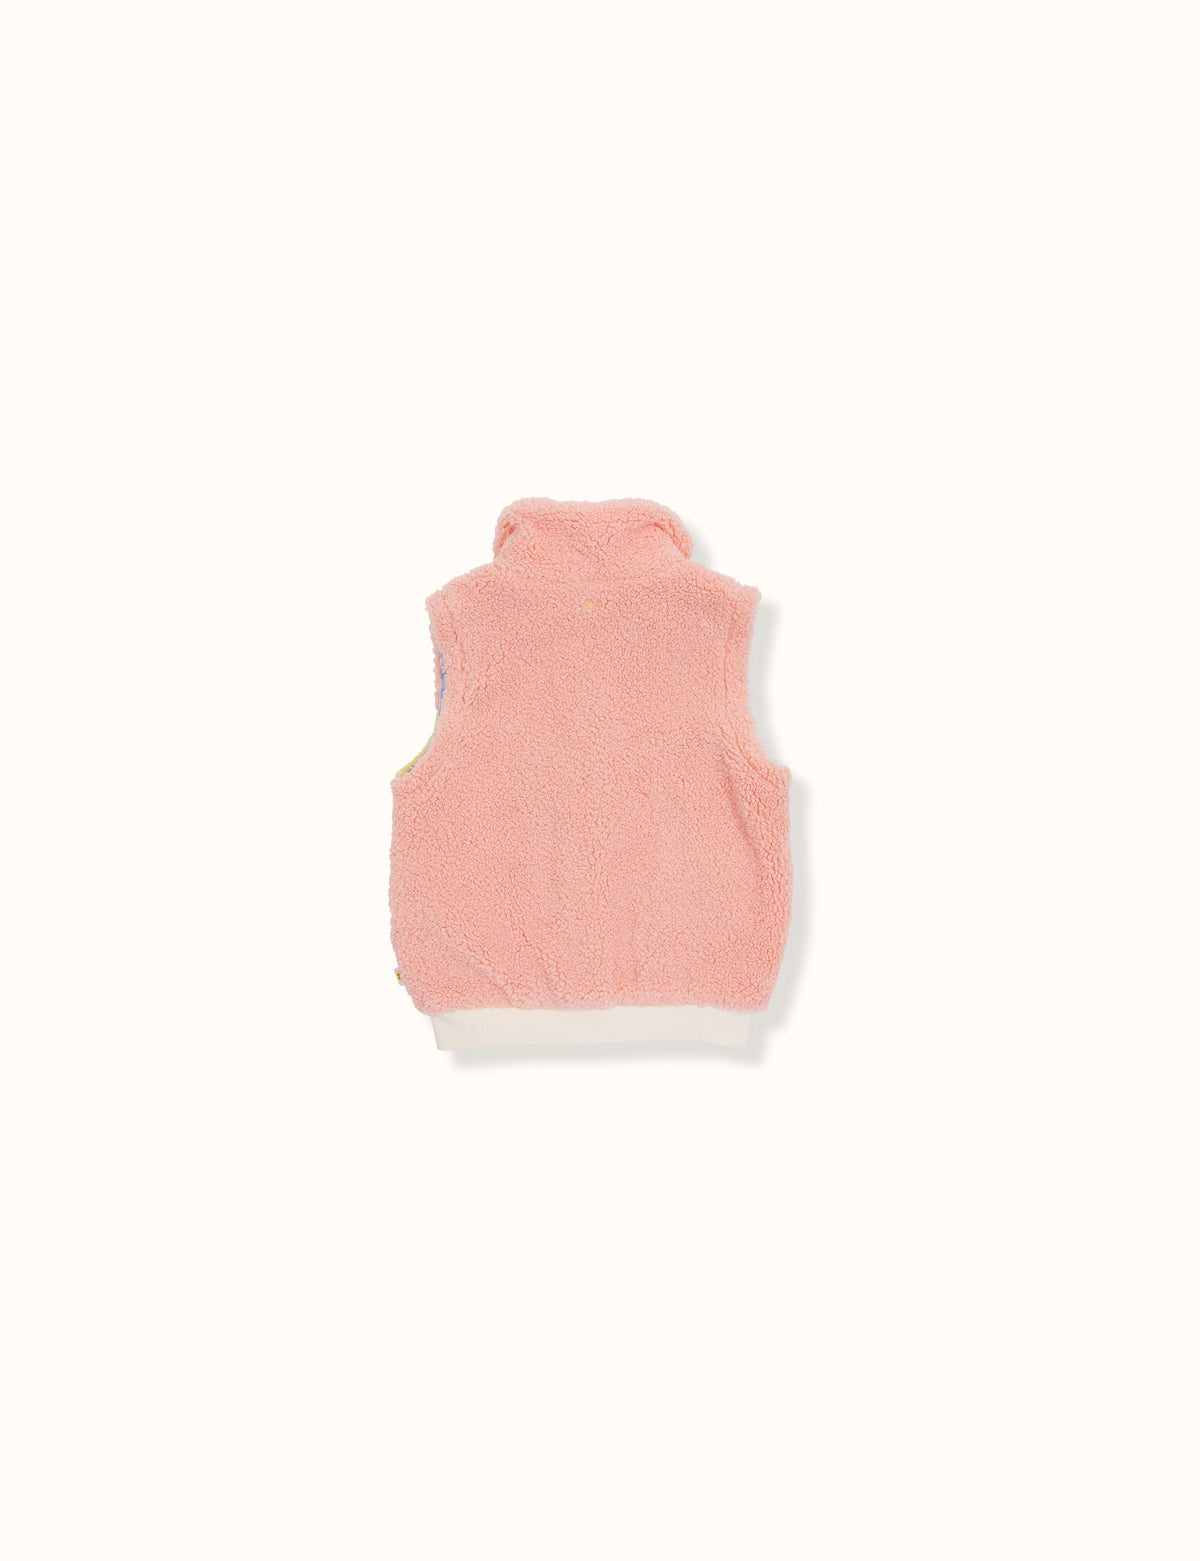 Maxx Shearling Jacket With Zip Off Sleeves - Peach Cream